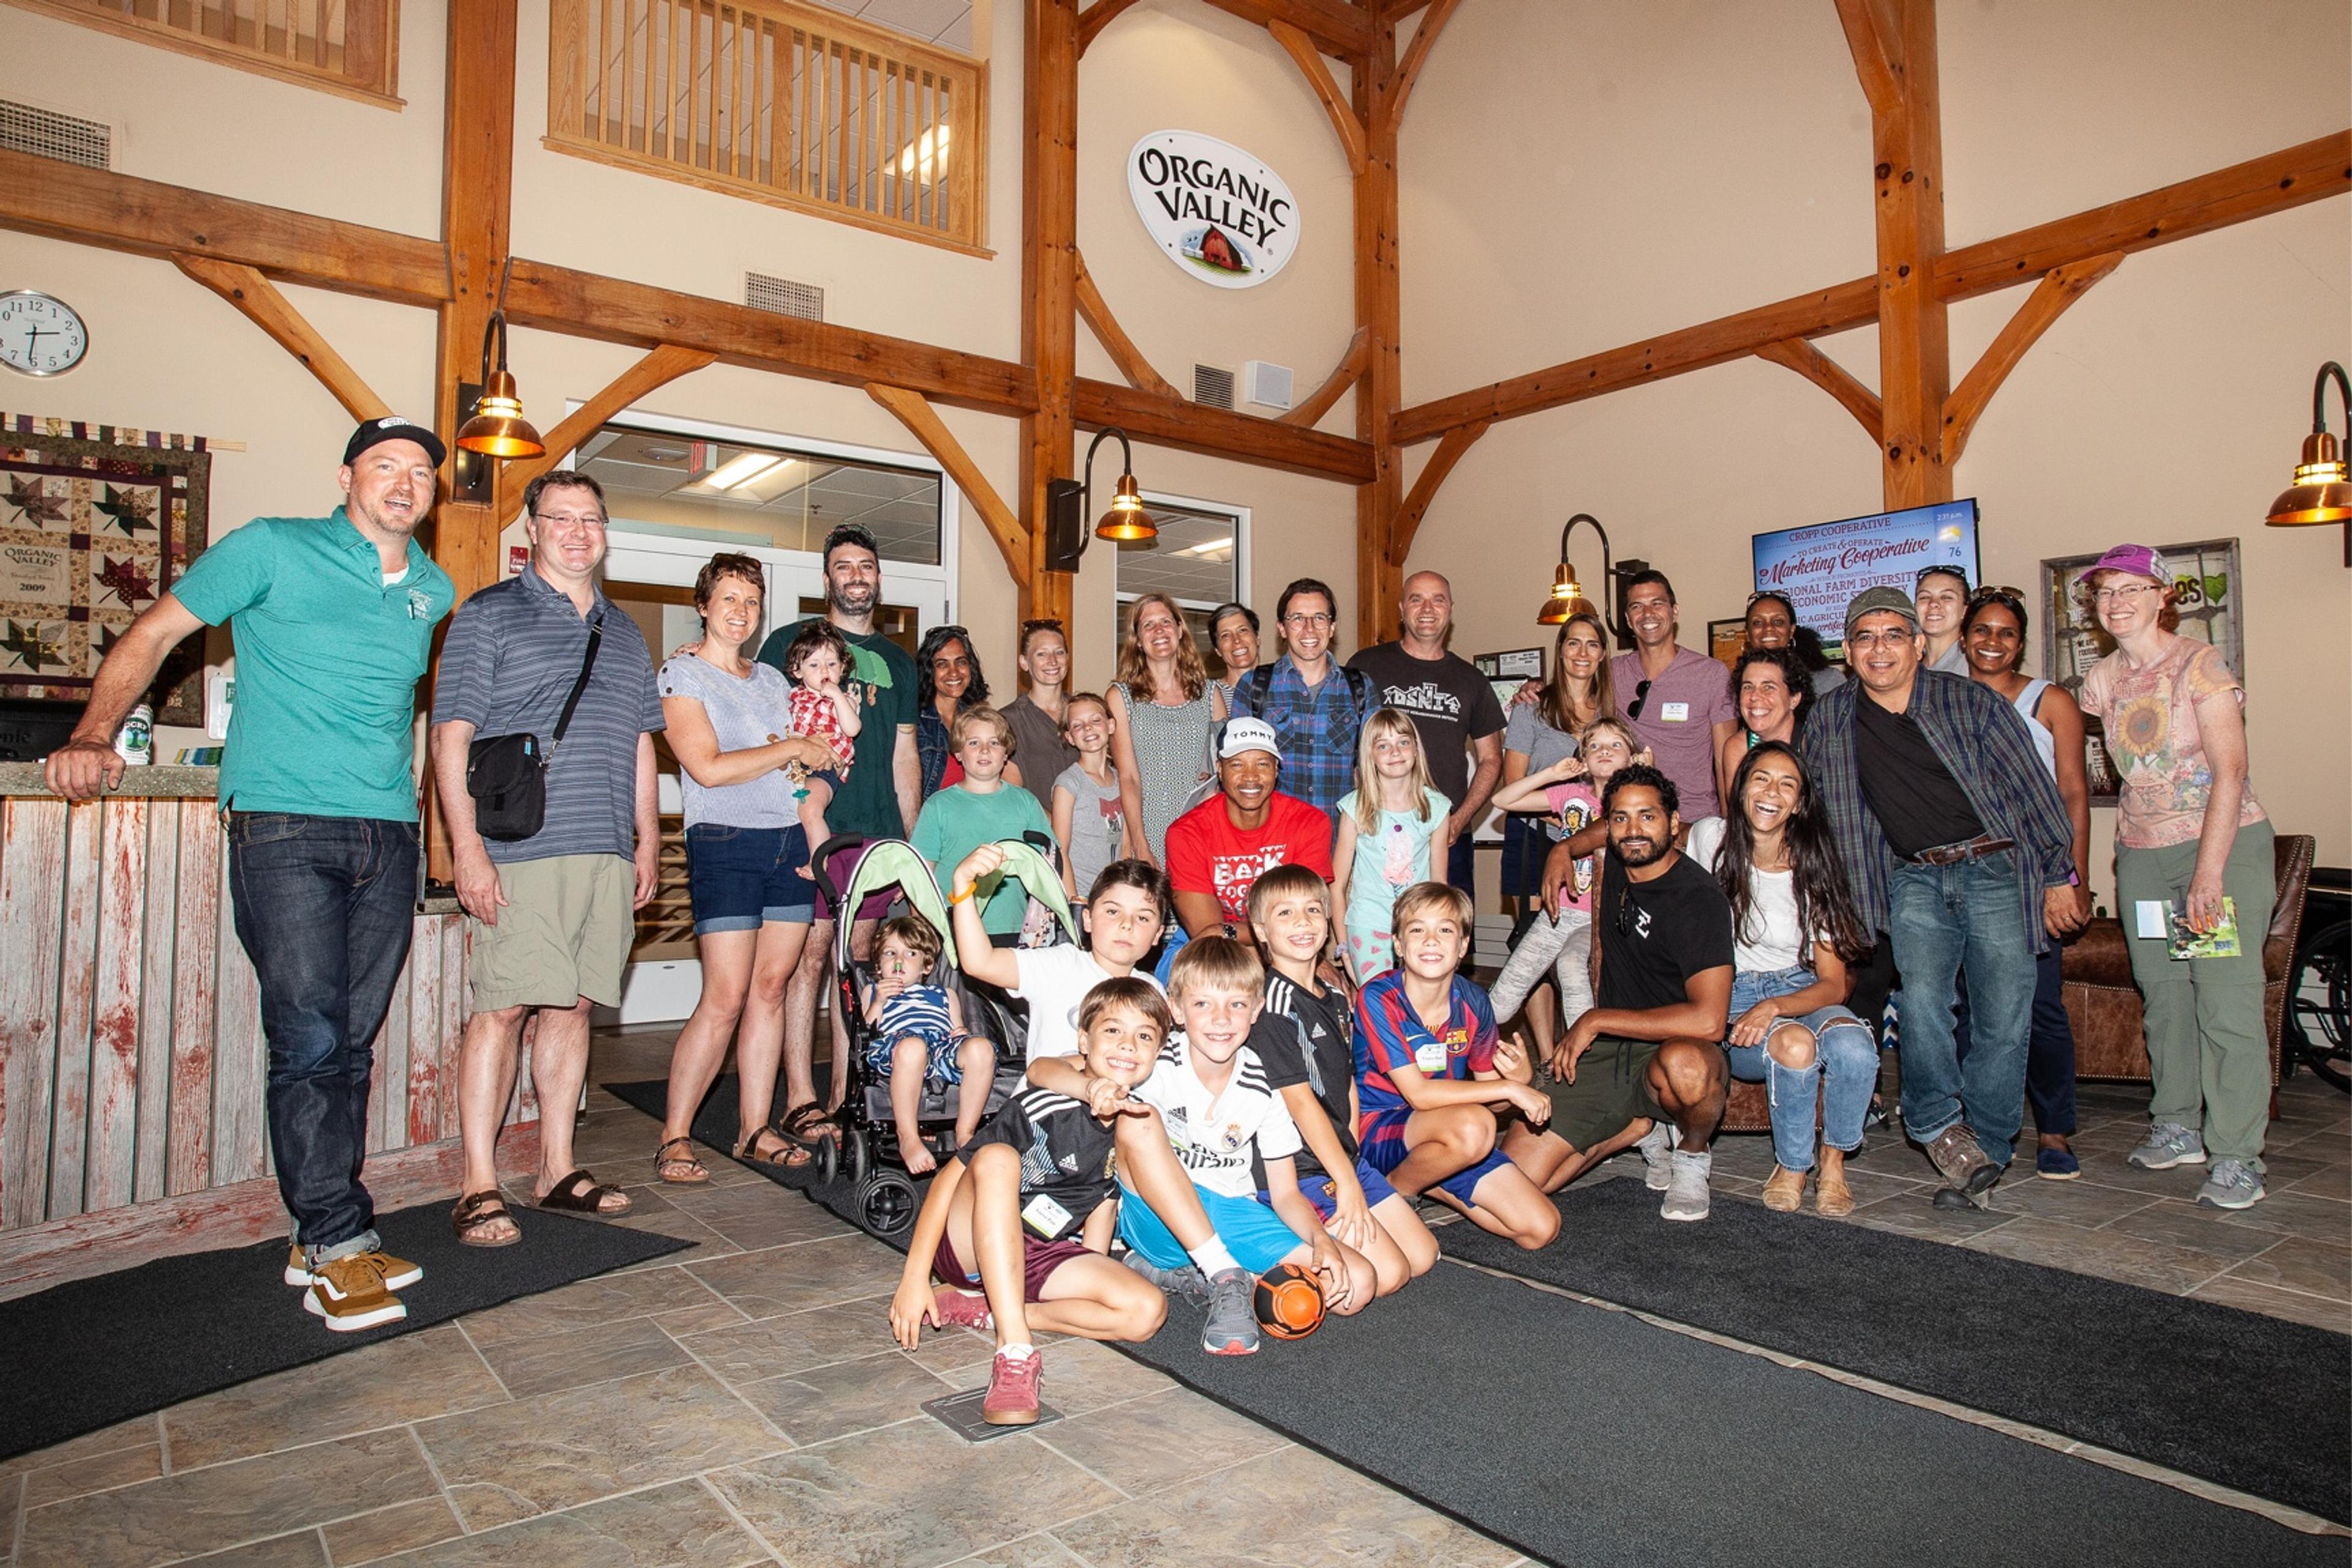 A large group of men, women and children pose in the Organic Valley office building lobby.